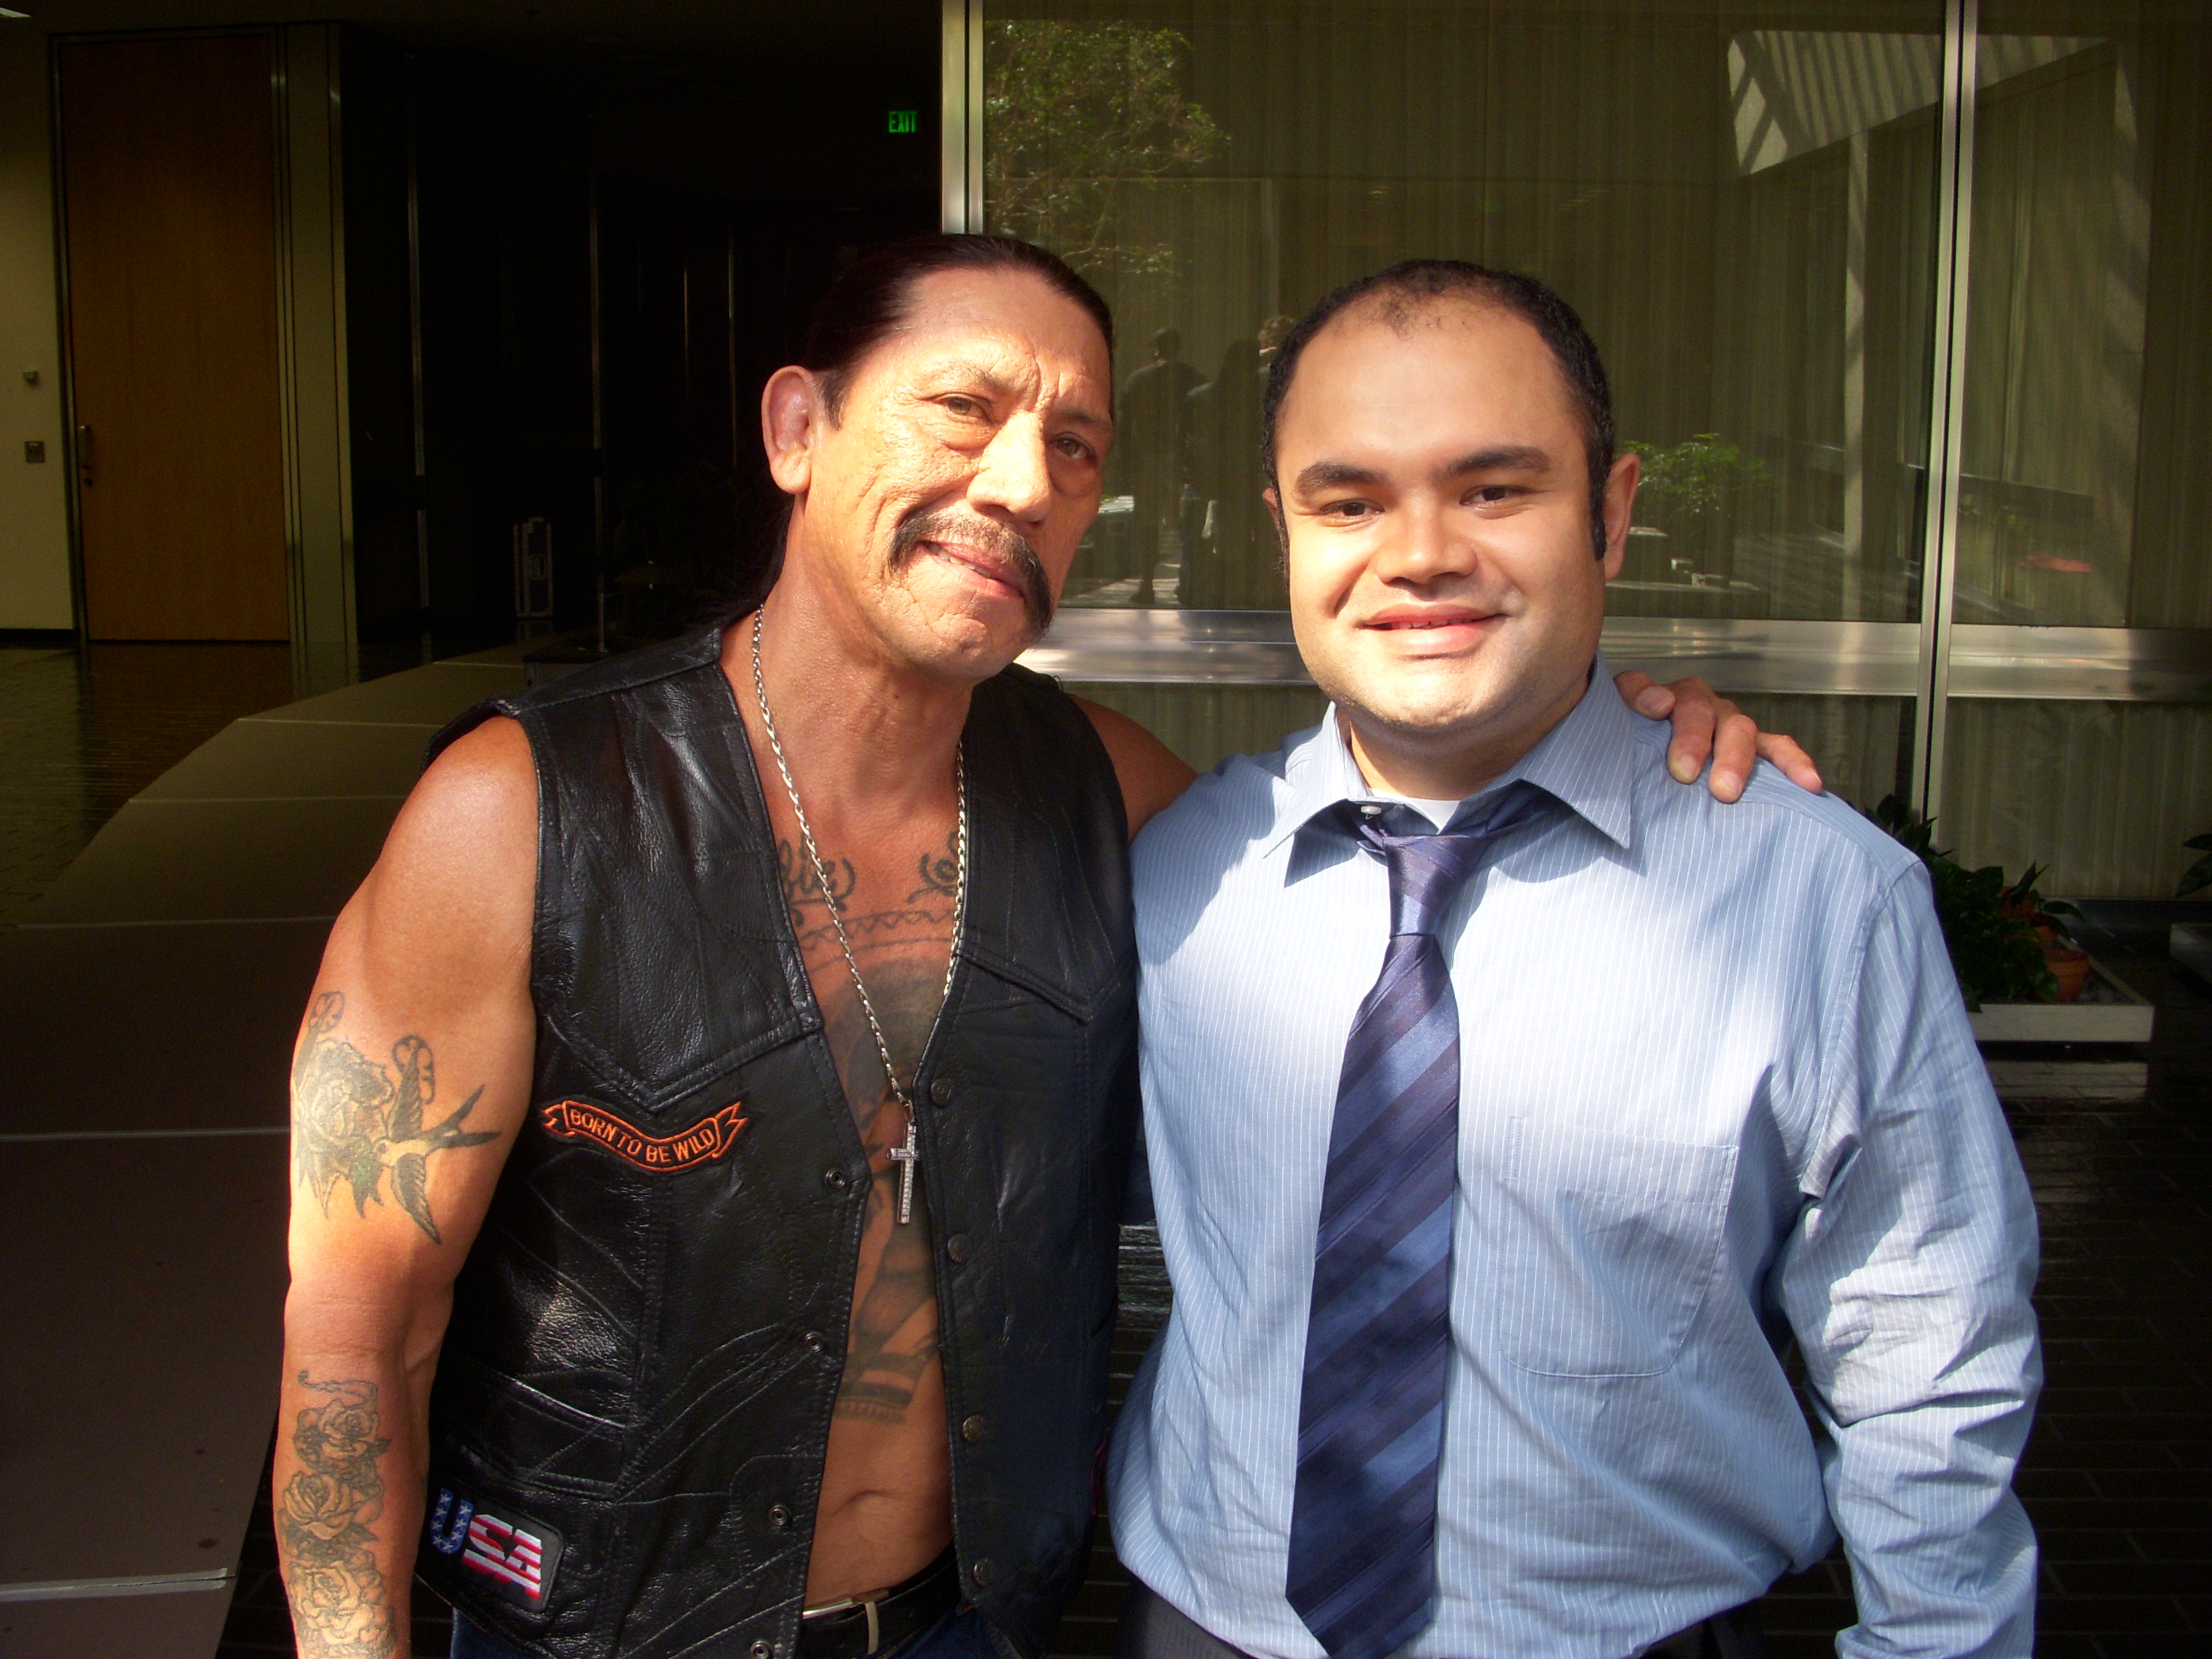 Danny Trejo and Erick Chavarria on the set of an ESPN Promo